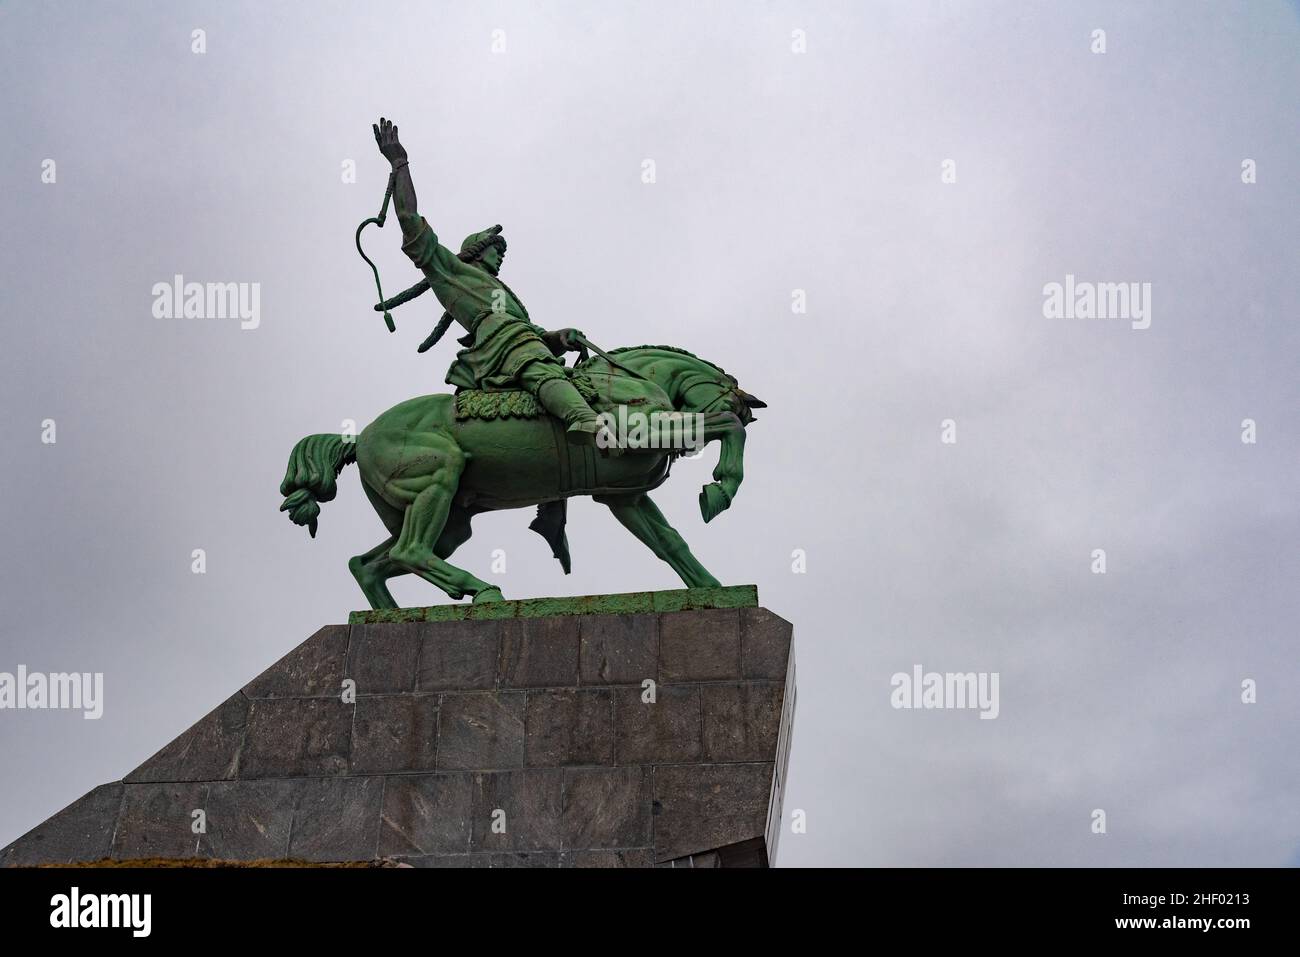 Monument to Salavat Yulaev in Ufa, Russia. Stock Photo